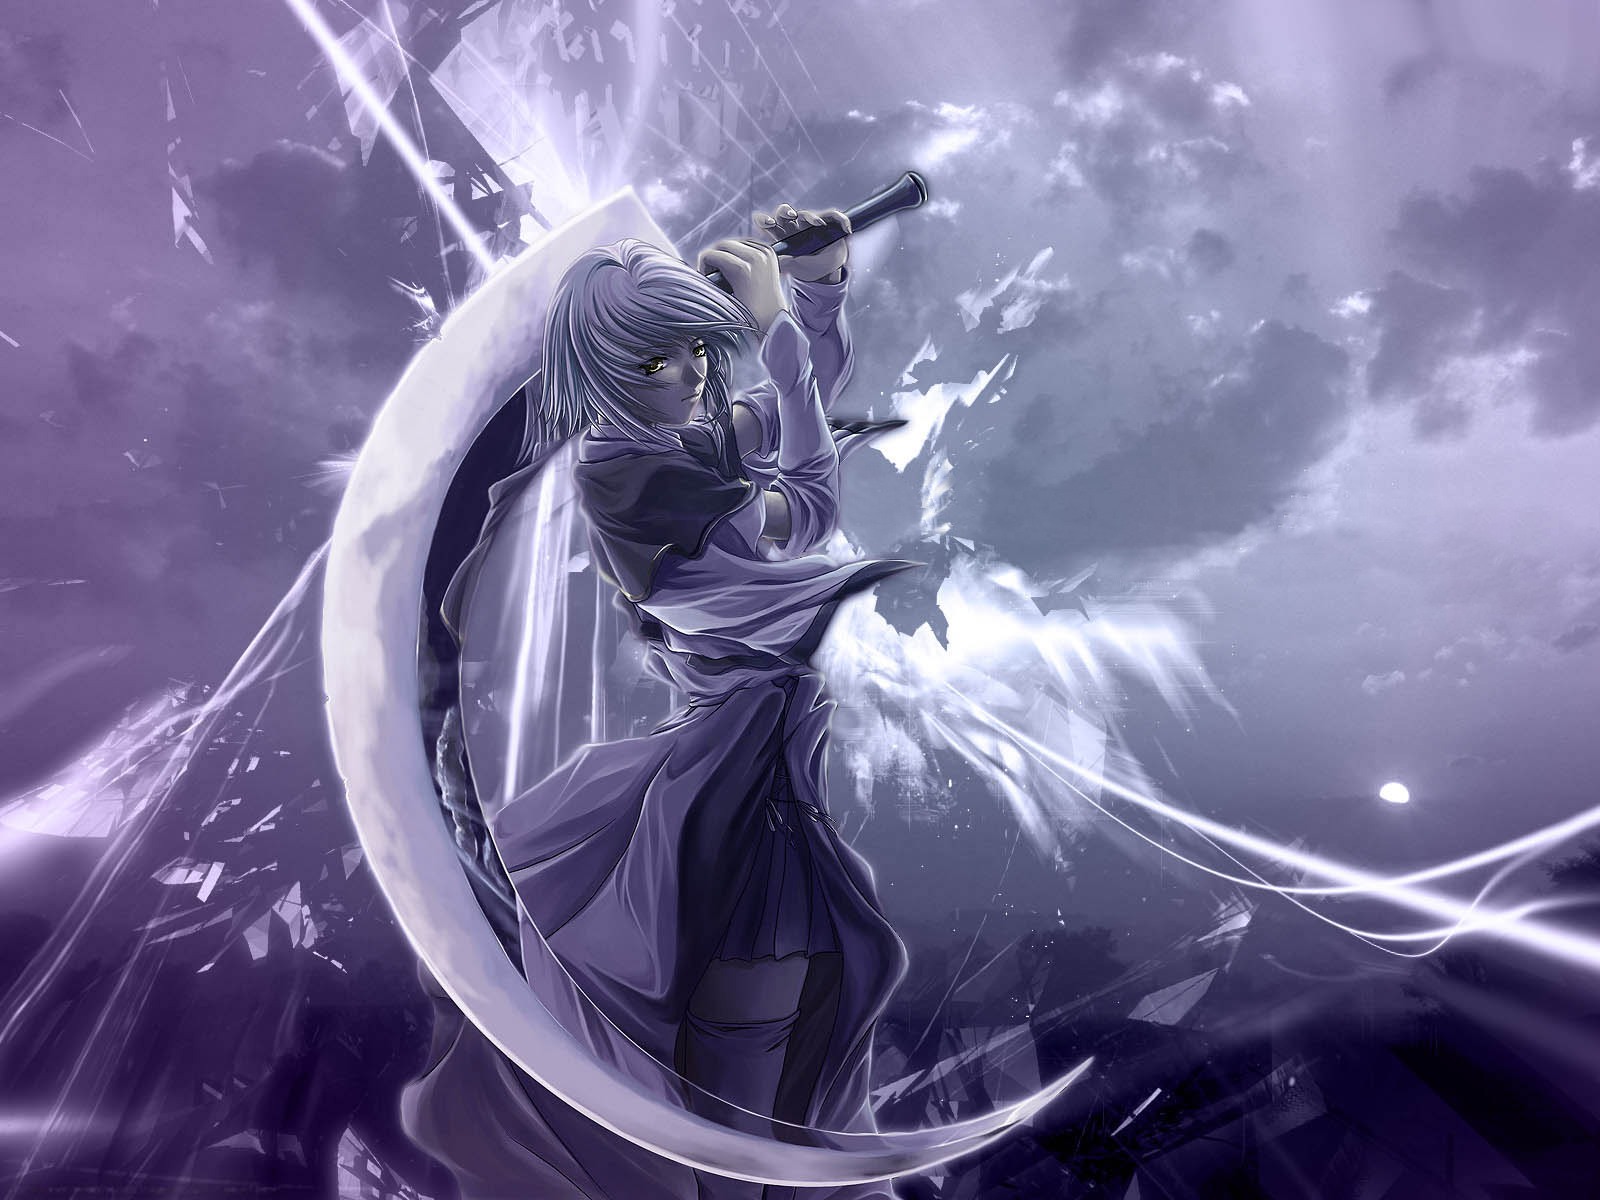 3400x4500 Resolution Luo Tianyi Vocaloid 3400x4500 Resolution Wallpaper   Wallpapers Den